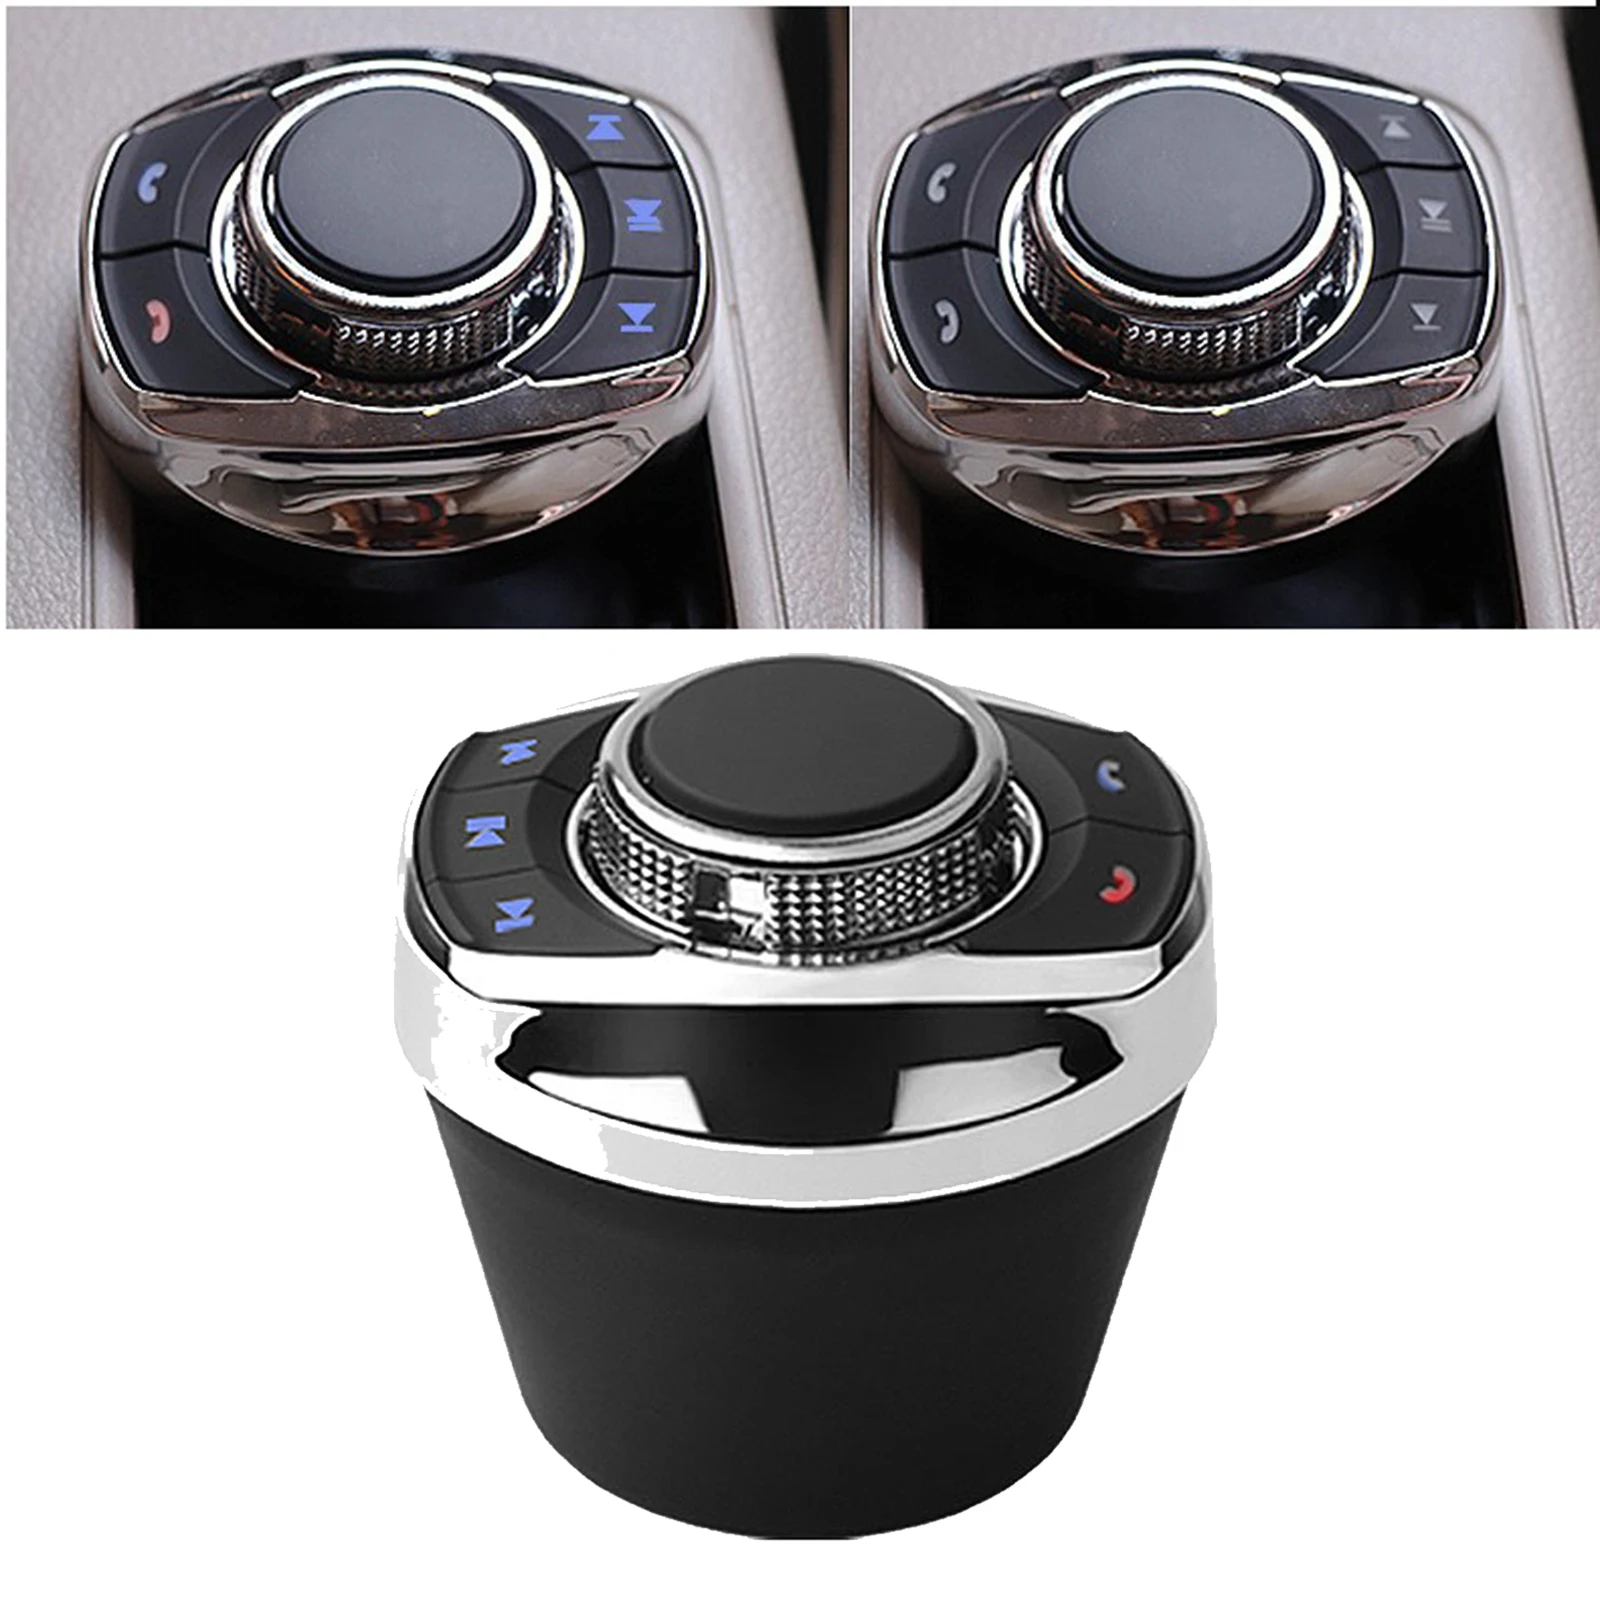 Car Wireless Steering Wheel Control Button Universal Cup Shape With LED Light 8 Keys Functions For Car Android Navigation Player